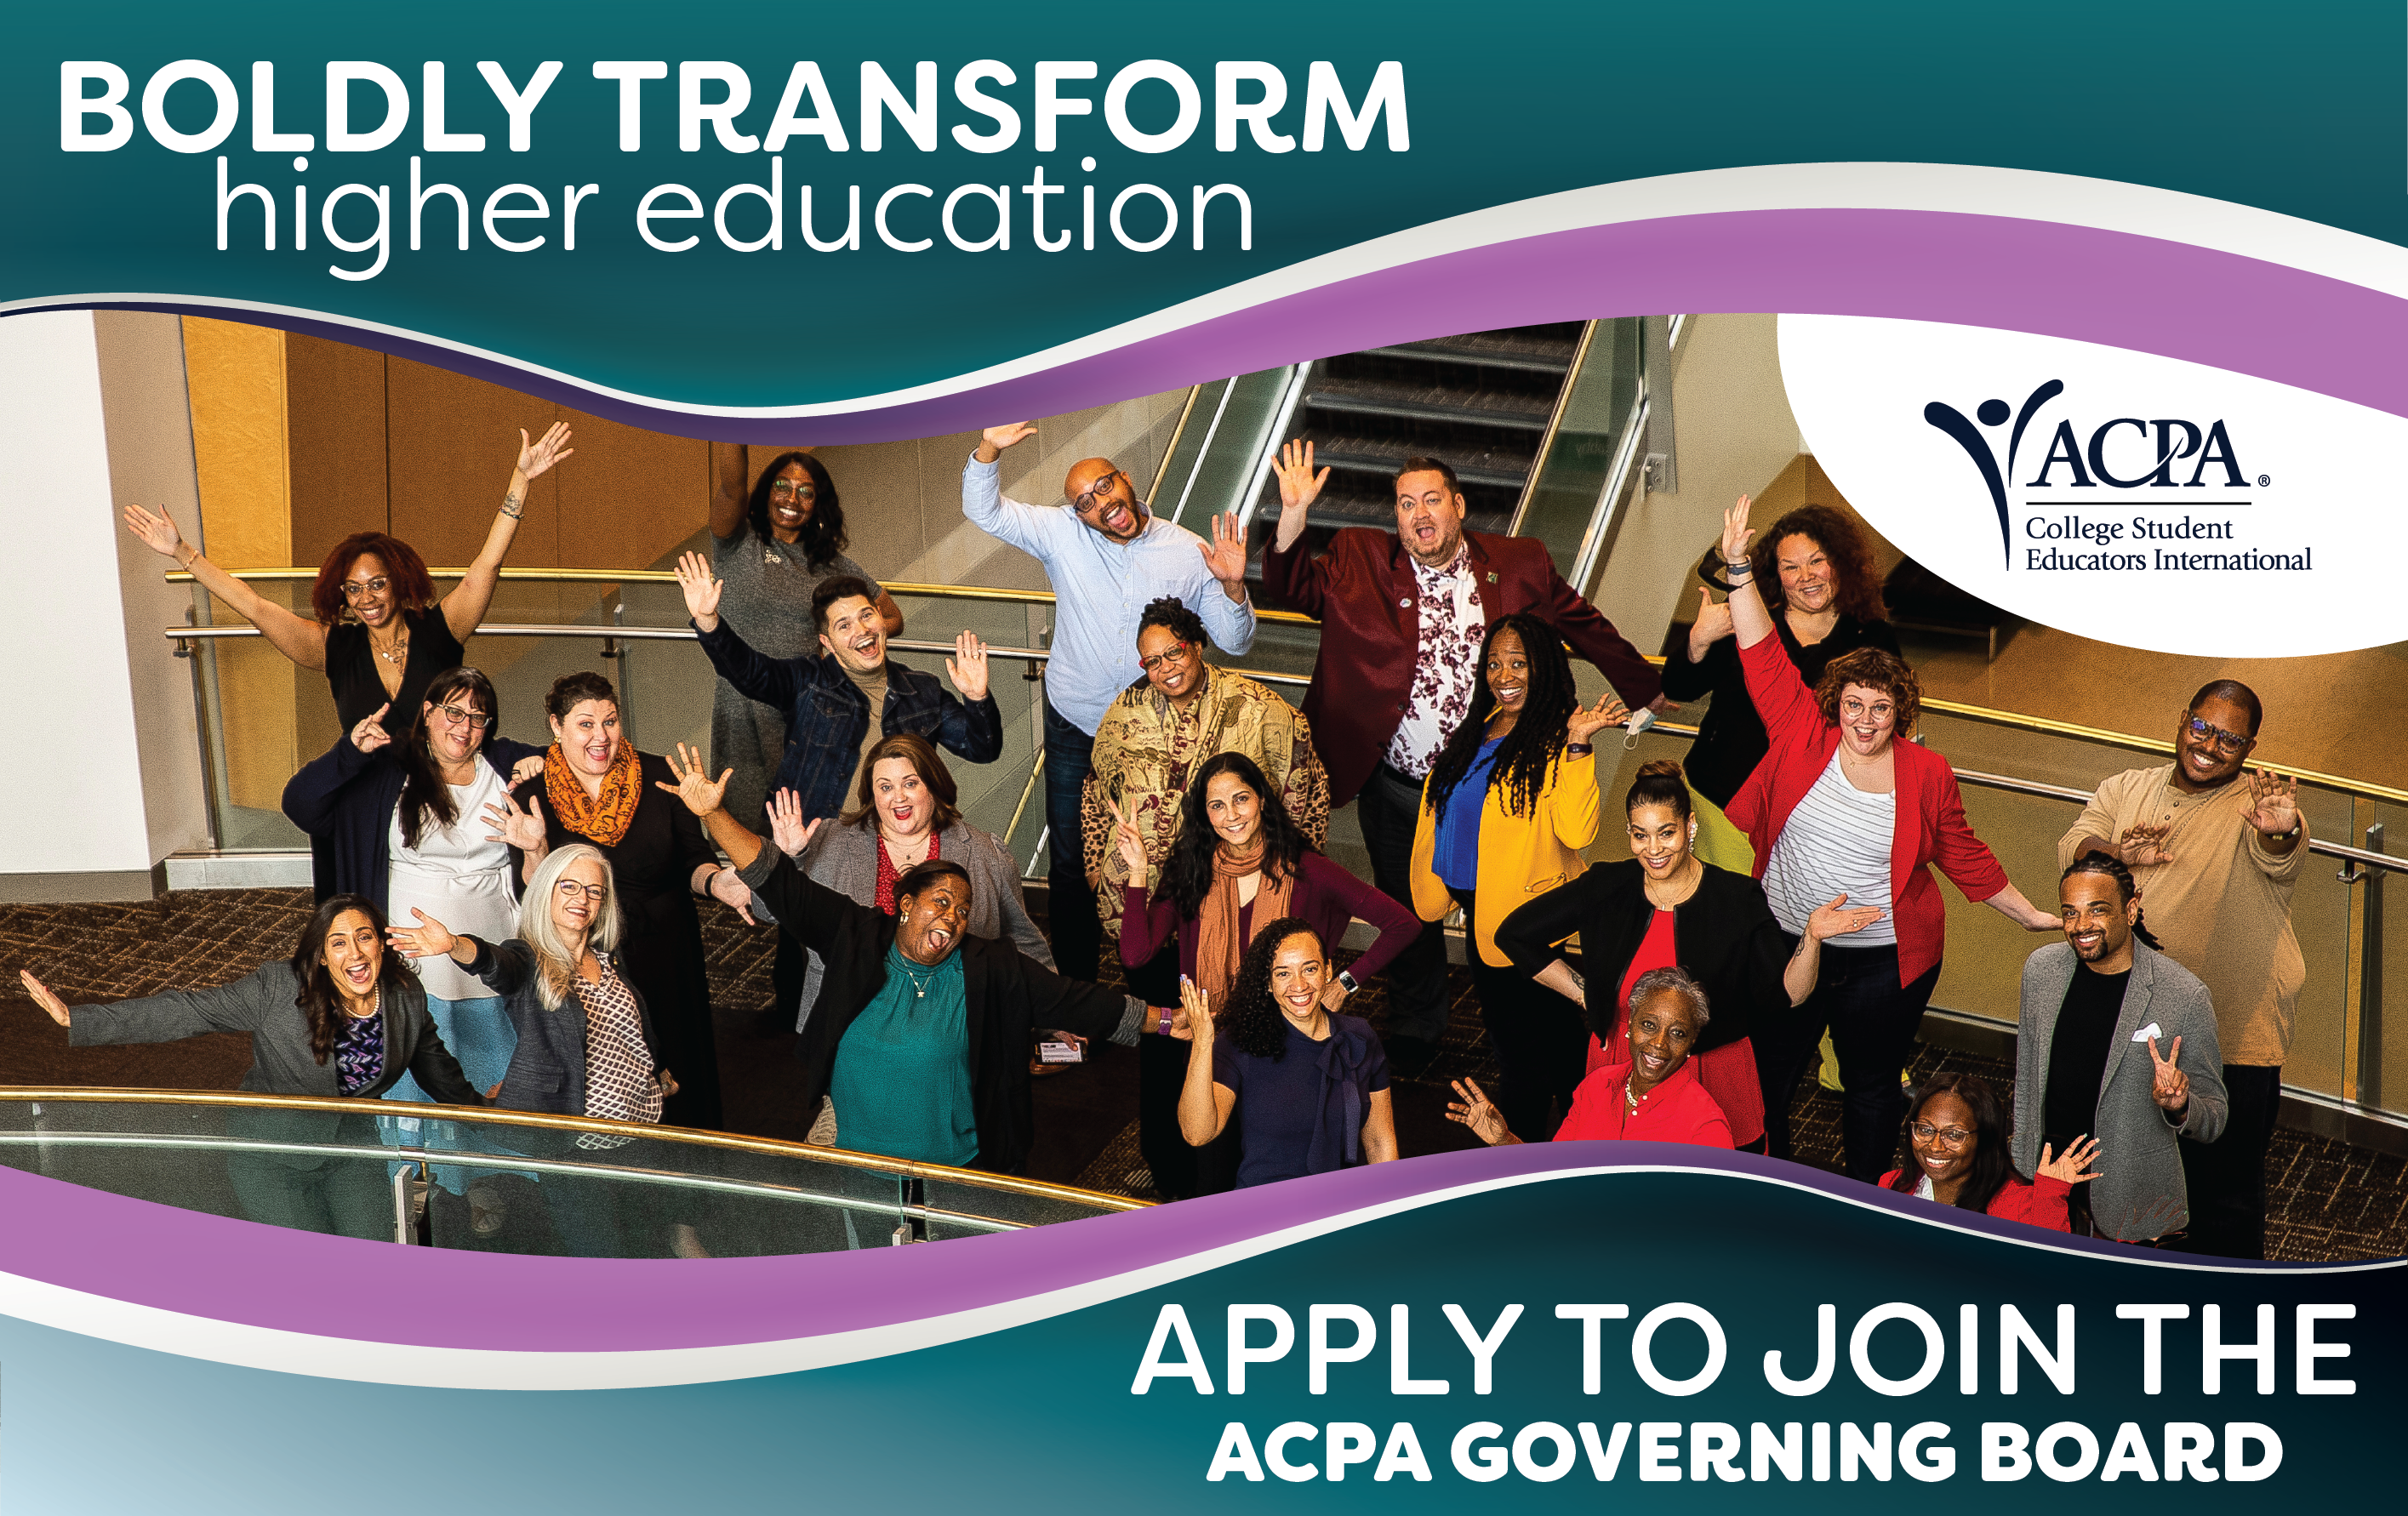 Boldly Transform higher education. apply to join the acpa governing board. includes a photo of the current governing board with their hands in the air cheering.